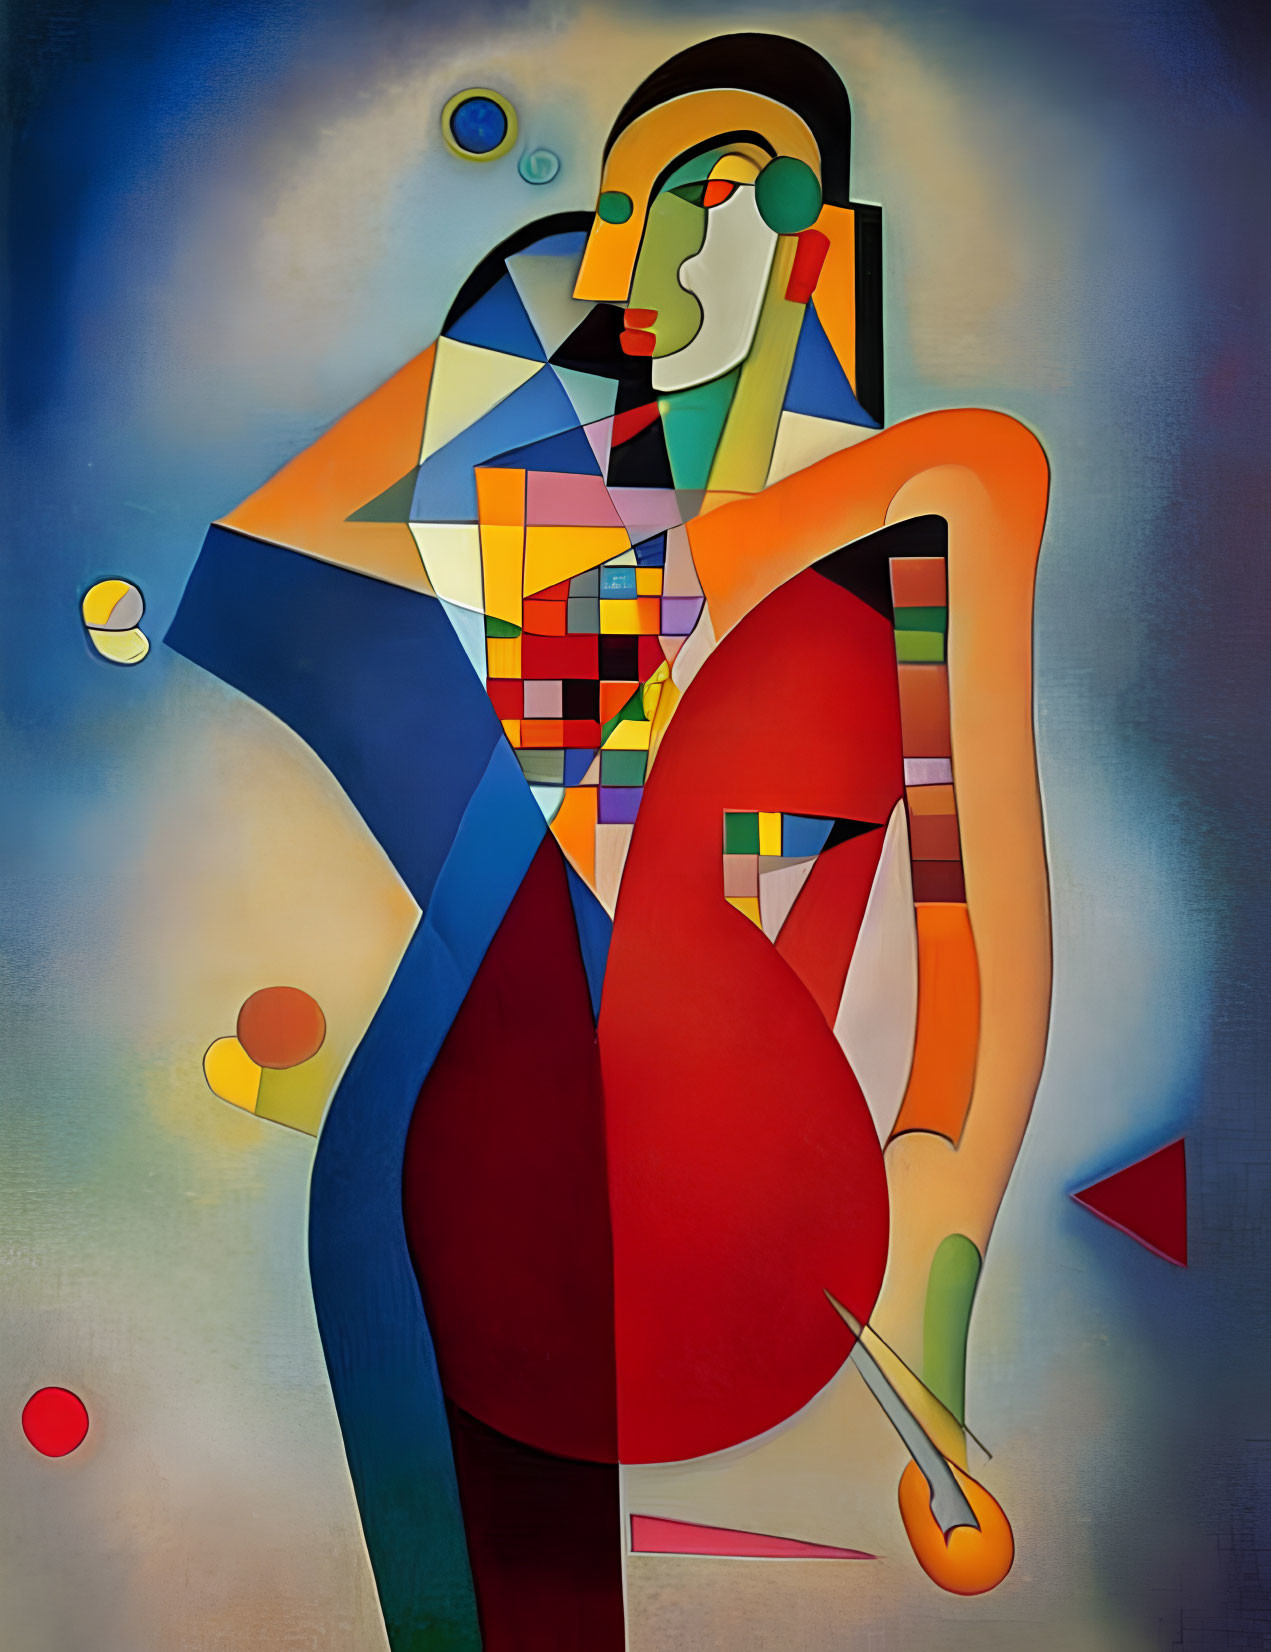 Colorful Cubist-style Abstract Painting of Female Figure with Geometric Shapes